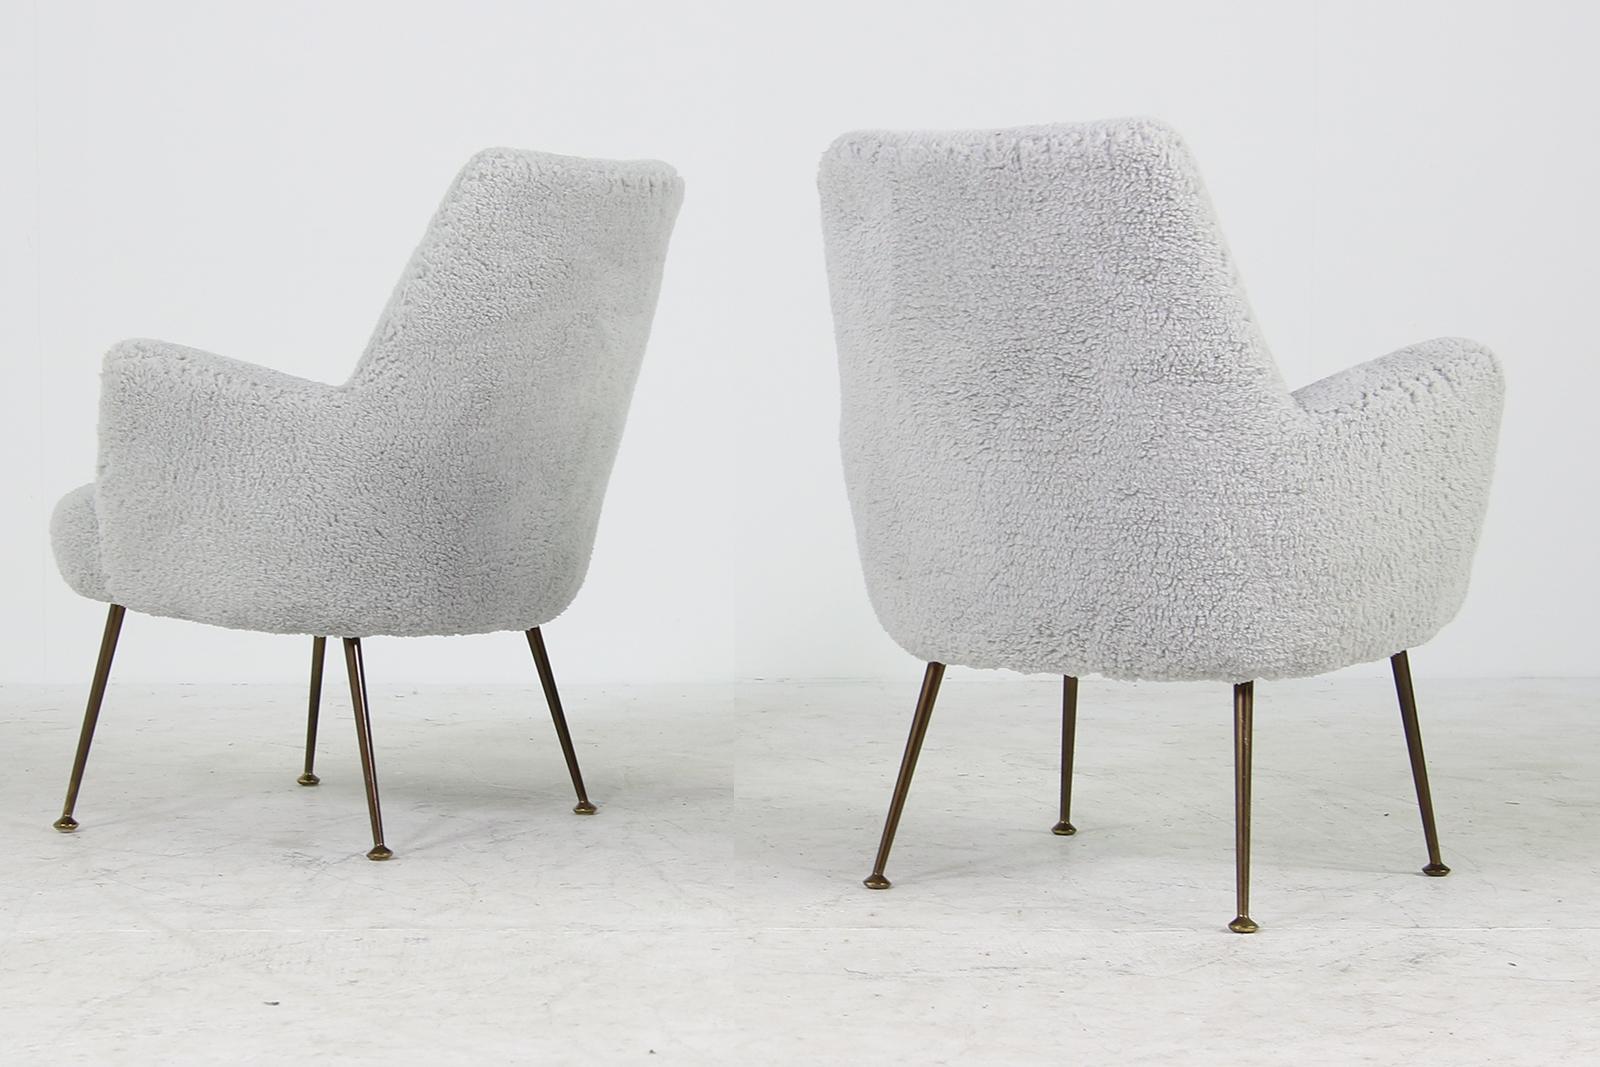 Beautiful and very rare 1950s pair of organic lounge chairs, Italy circa 1950 with new upholstery and covered with new super soft light grey teddy fur fabric, like sheepskin, but cotton mix fabric, very soft to the touch, legs are made of brass.